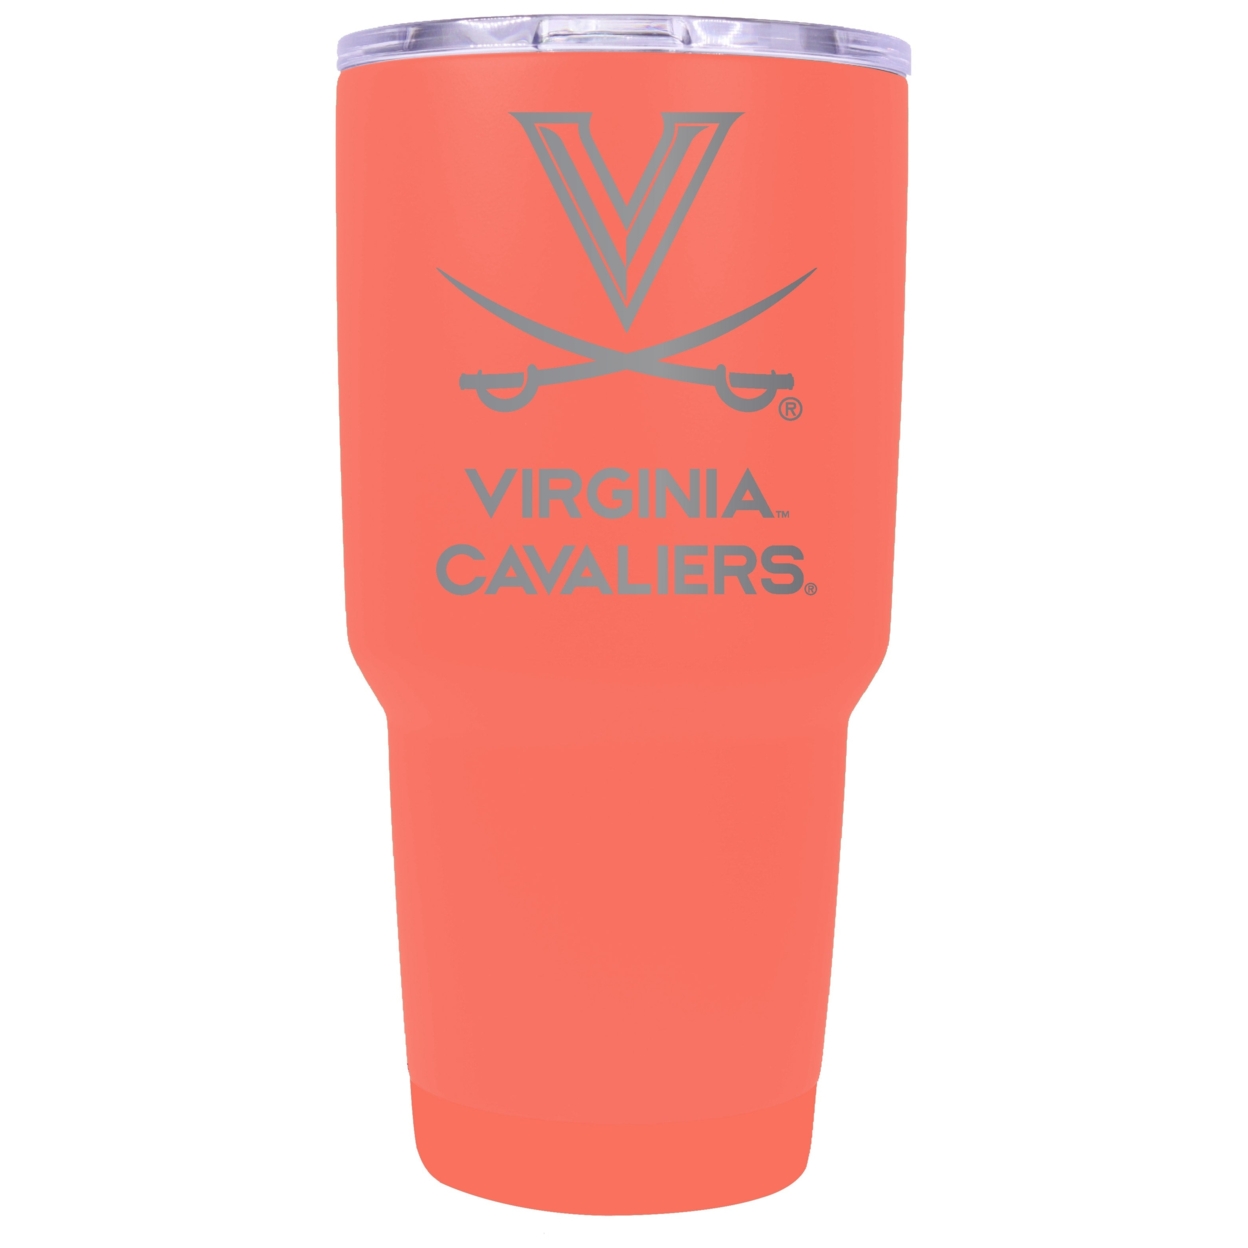 Virginia Cavaliers 24 Oz Laser Engraved Stainless Steel Insulated Tumbler - Choose Your Color. - Coral